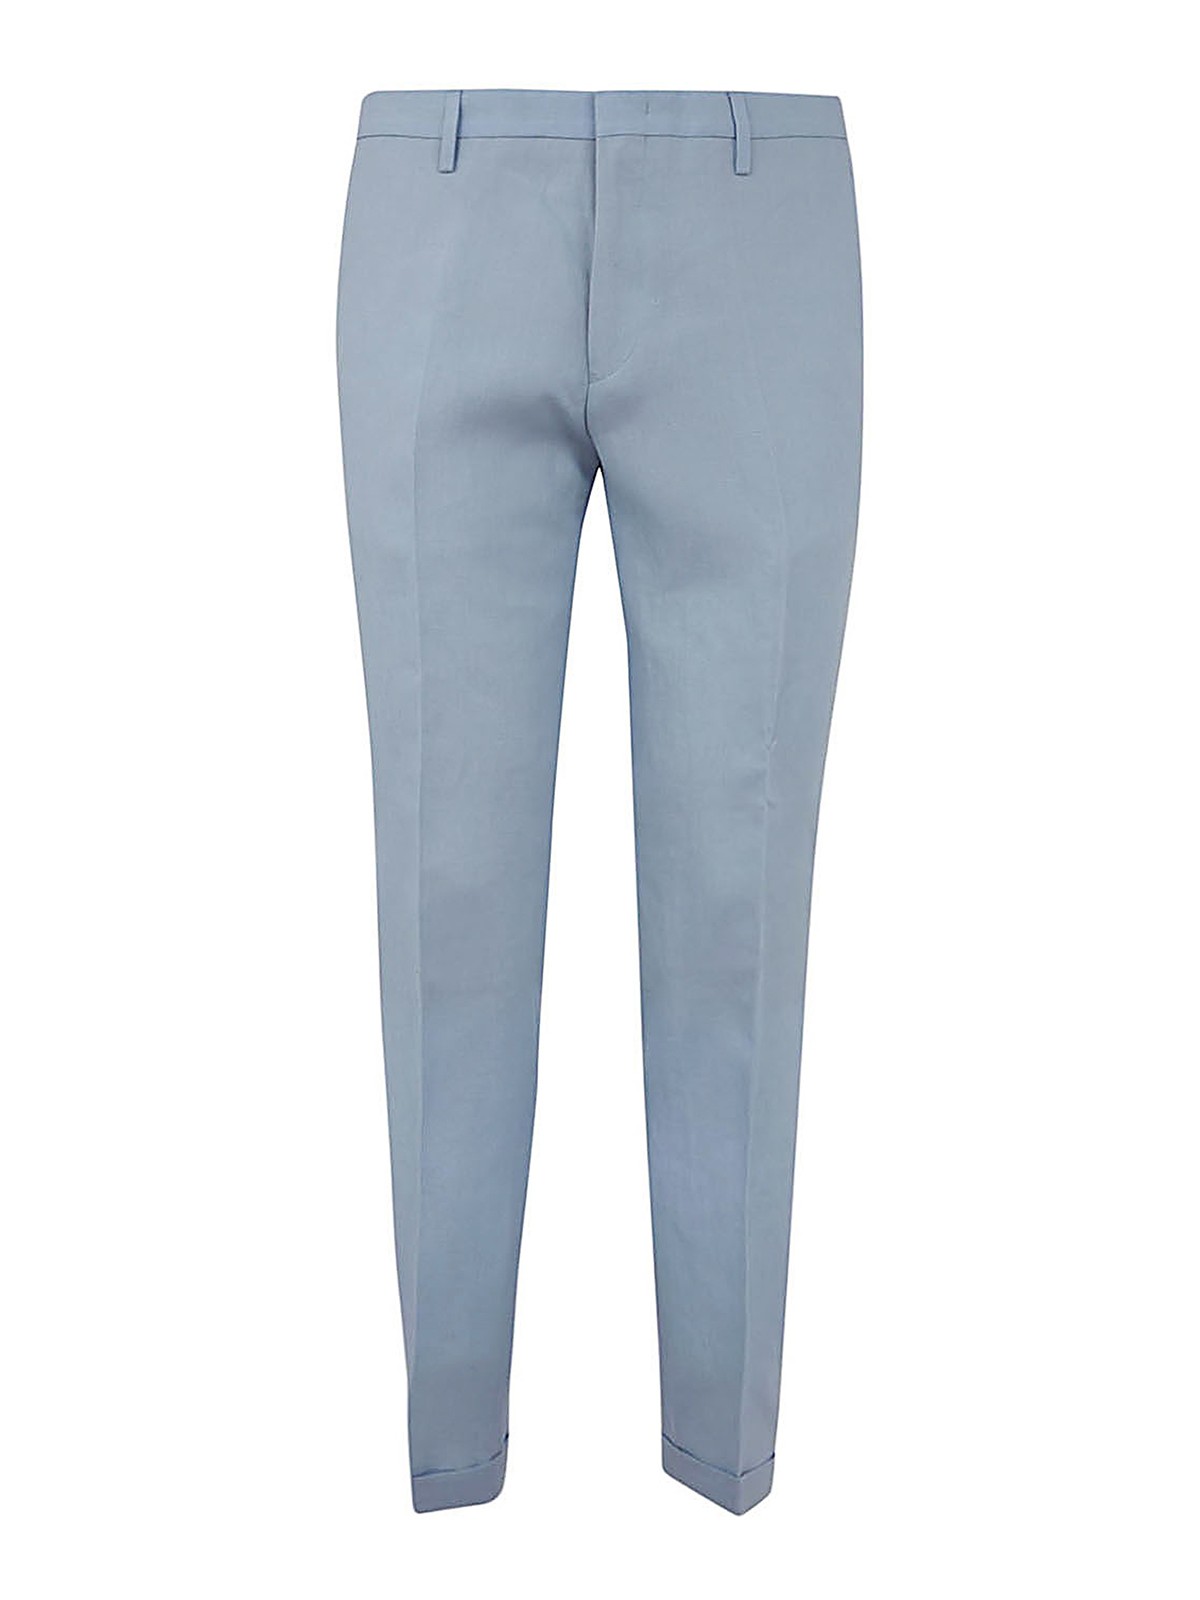 Paul Smith - Straight-Leg Cotton and Linen-Blend Trousers - Blue Paul Smith